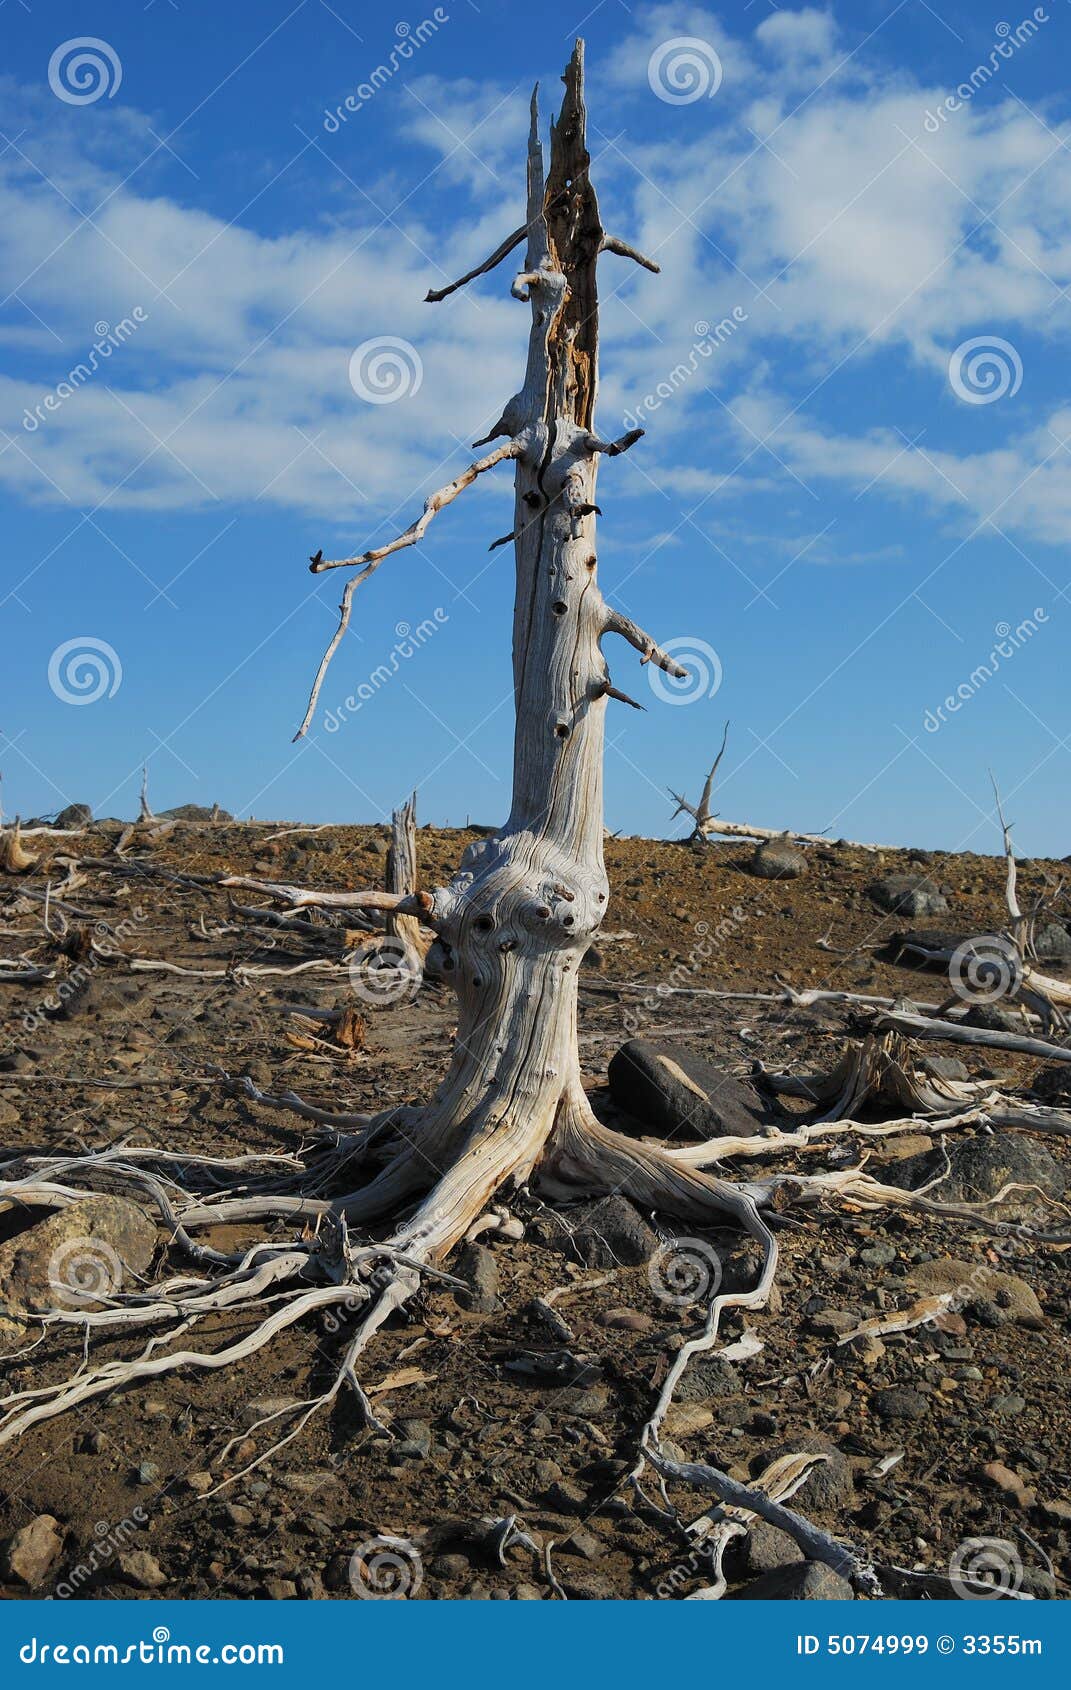 The lost tree stock image. Image of eroded, mountains - 5074999